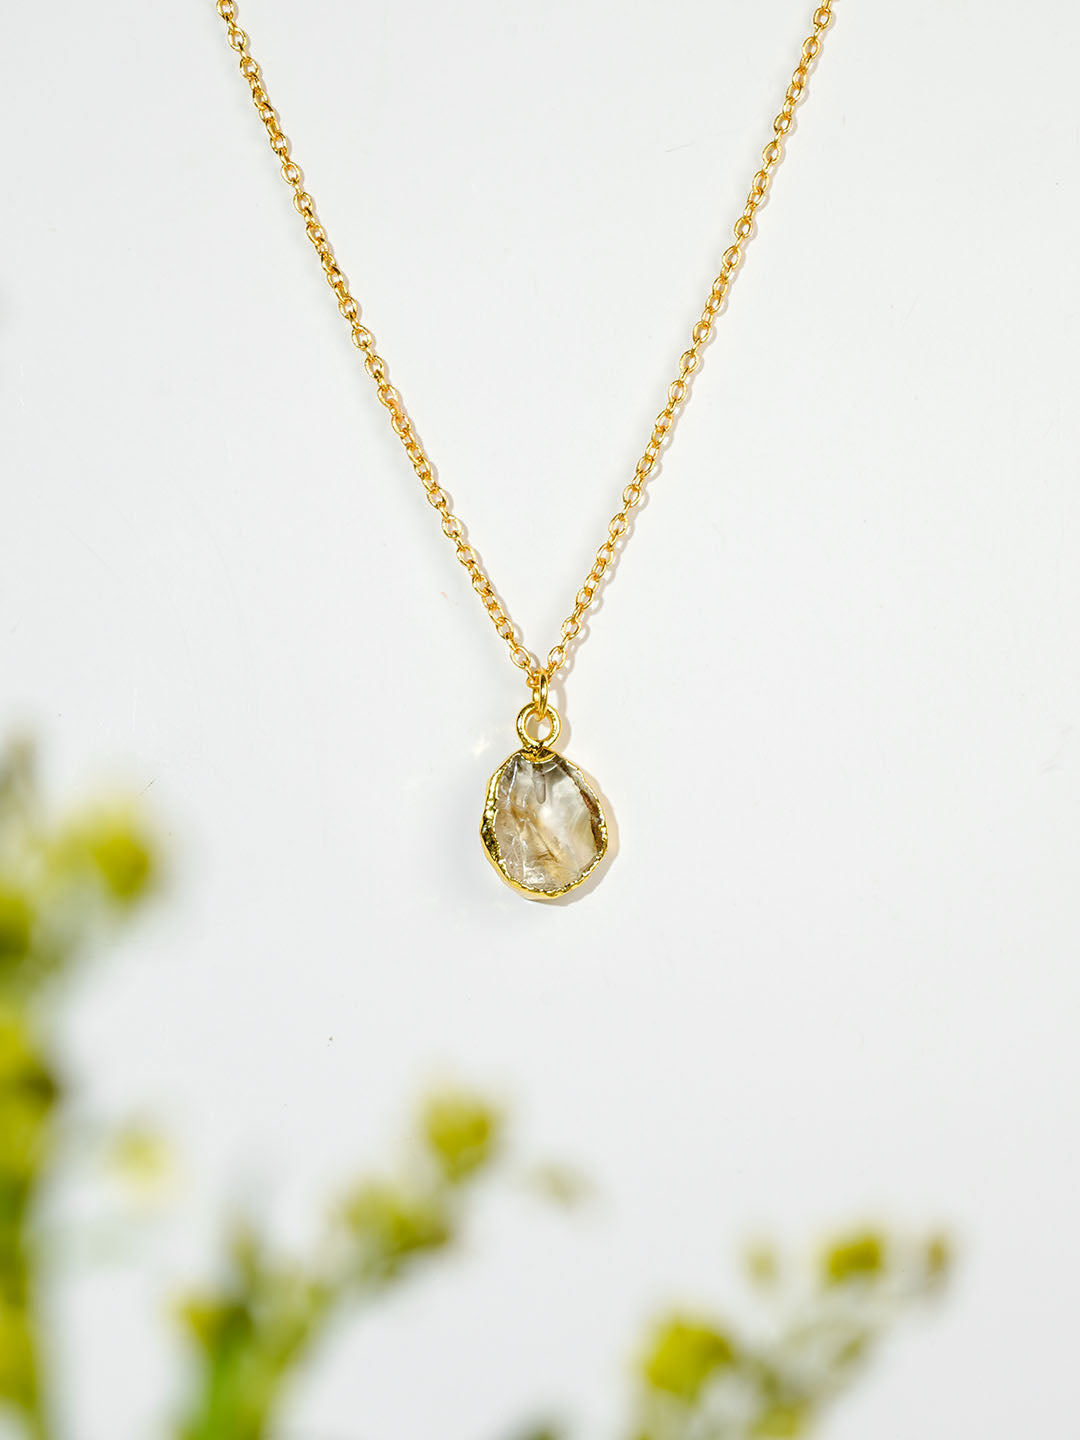 Natural Citrine Crystal Gemstone Oval Cutting Shape Pendant/Locket with  Metal Chain for Reiki Healing and Crystal Healing Pendant (Size : 25 mm)